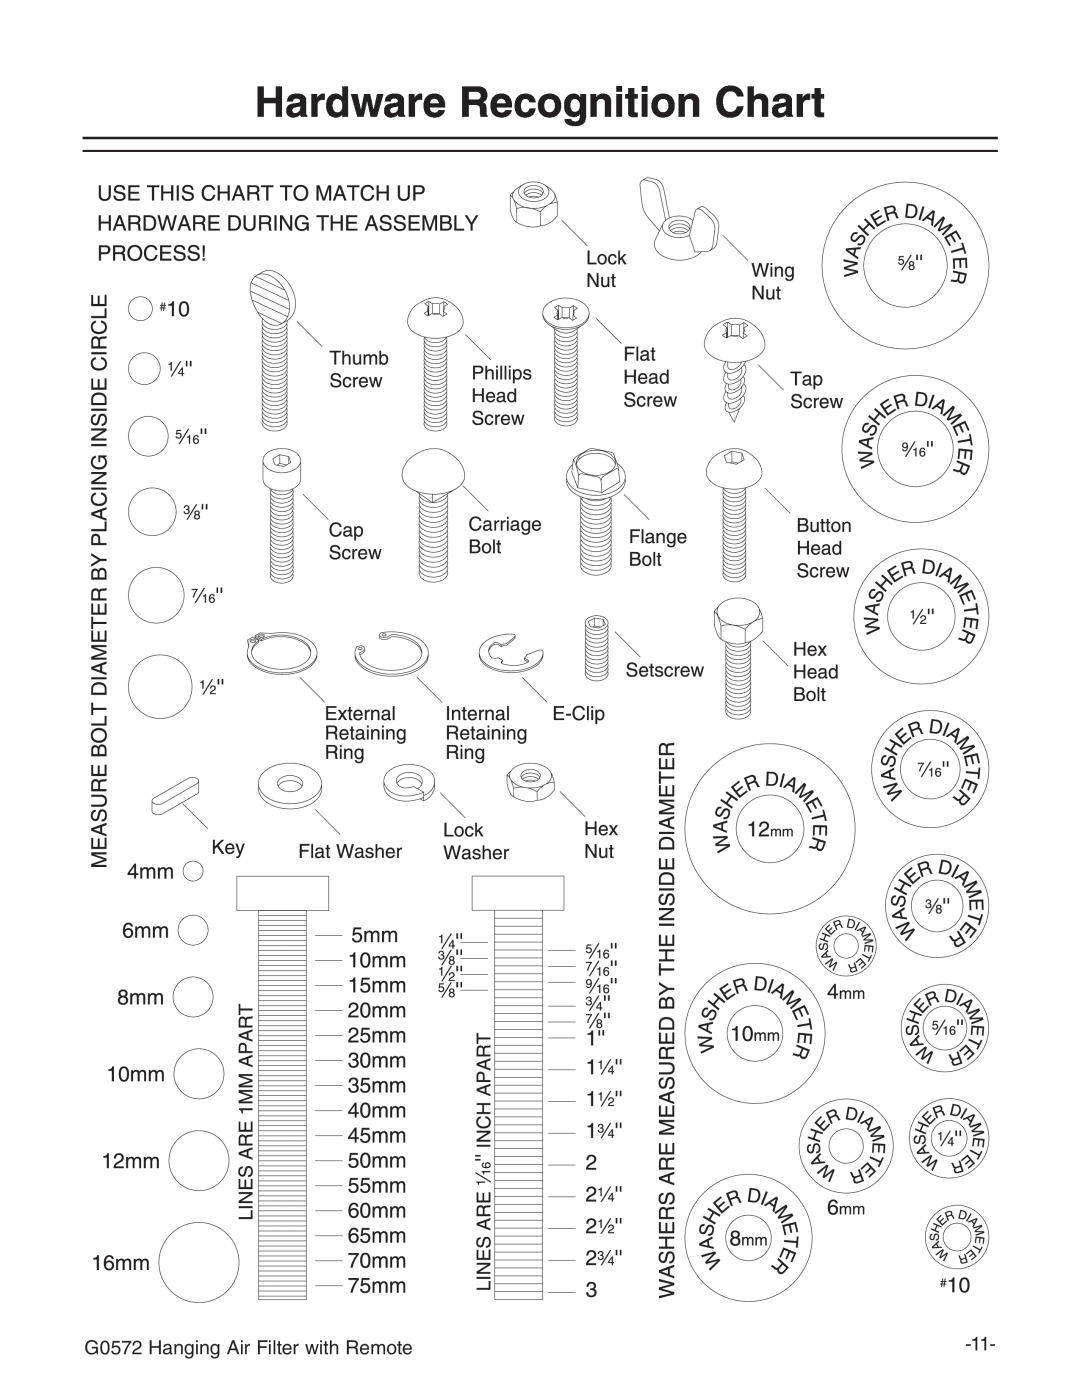 Grizzly instruction manual Hardware Recognition Chart, G0572 Hanging Air Filter with Remote 